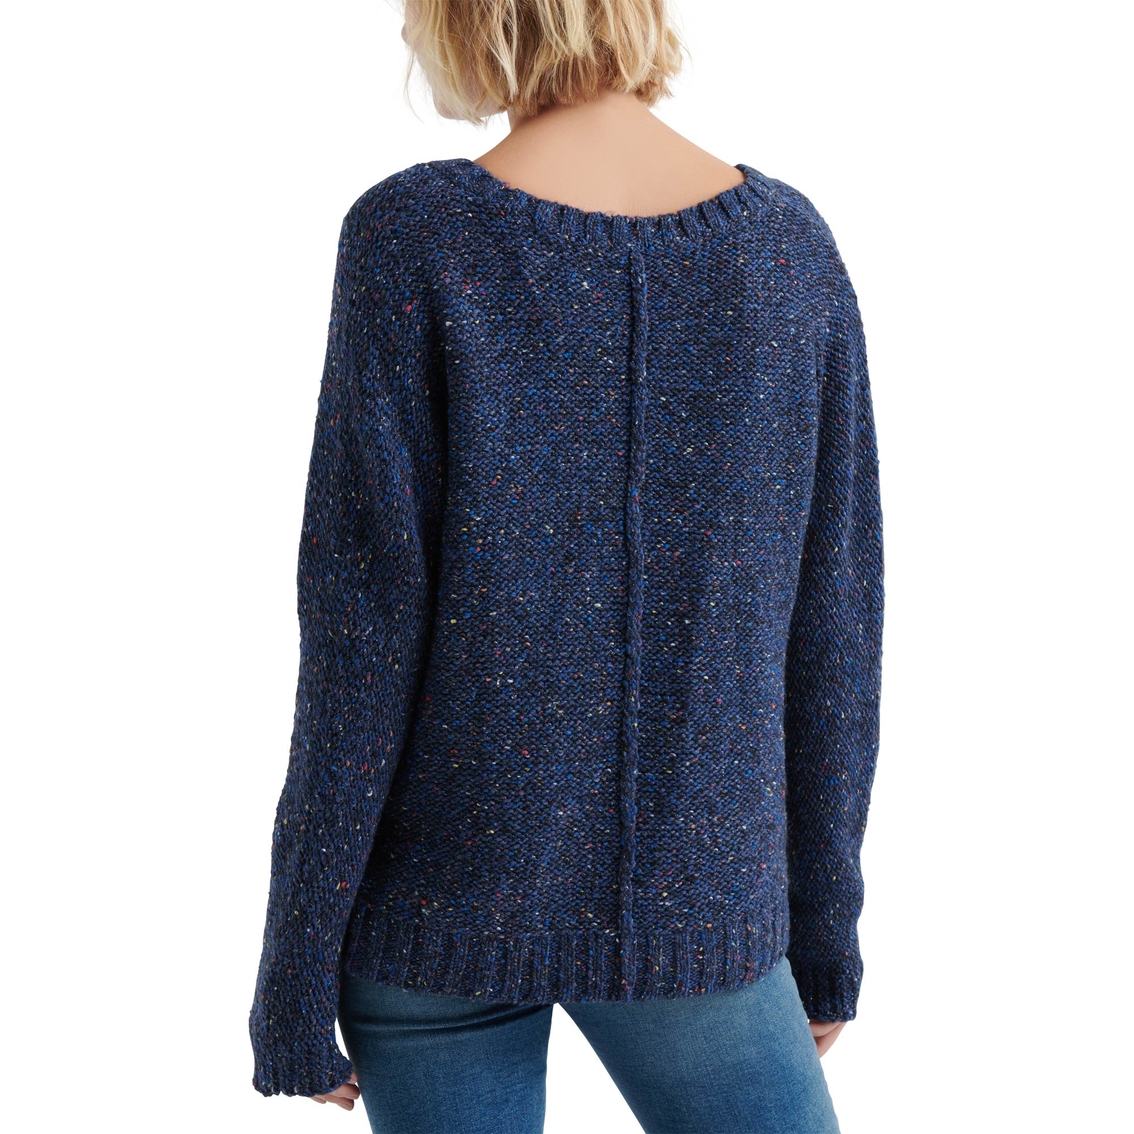 Lucky Brand Multicolored Sweater - Image 2 of 3